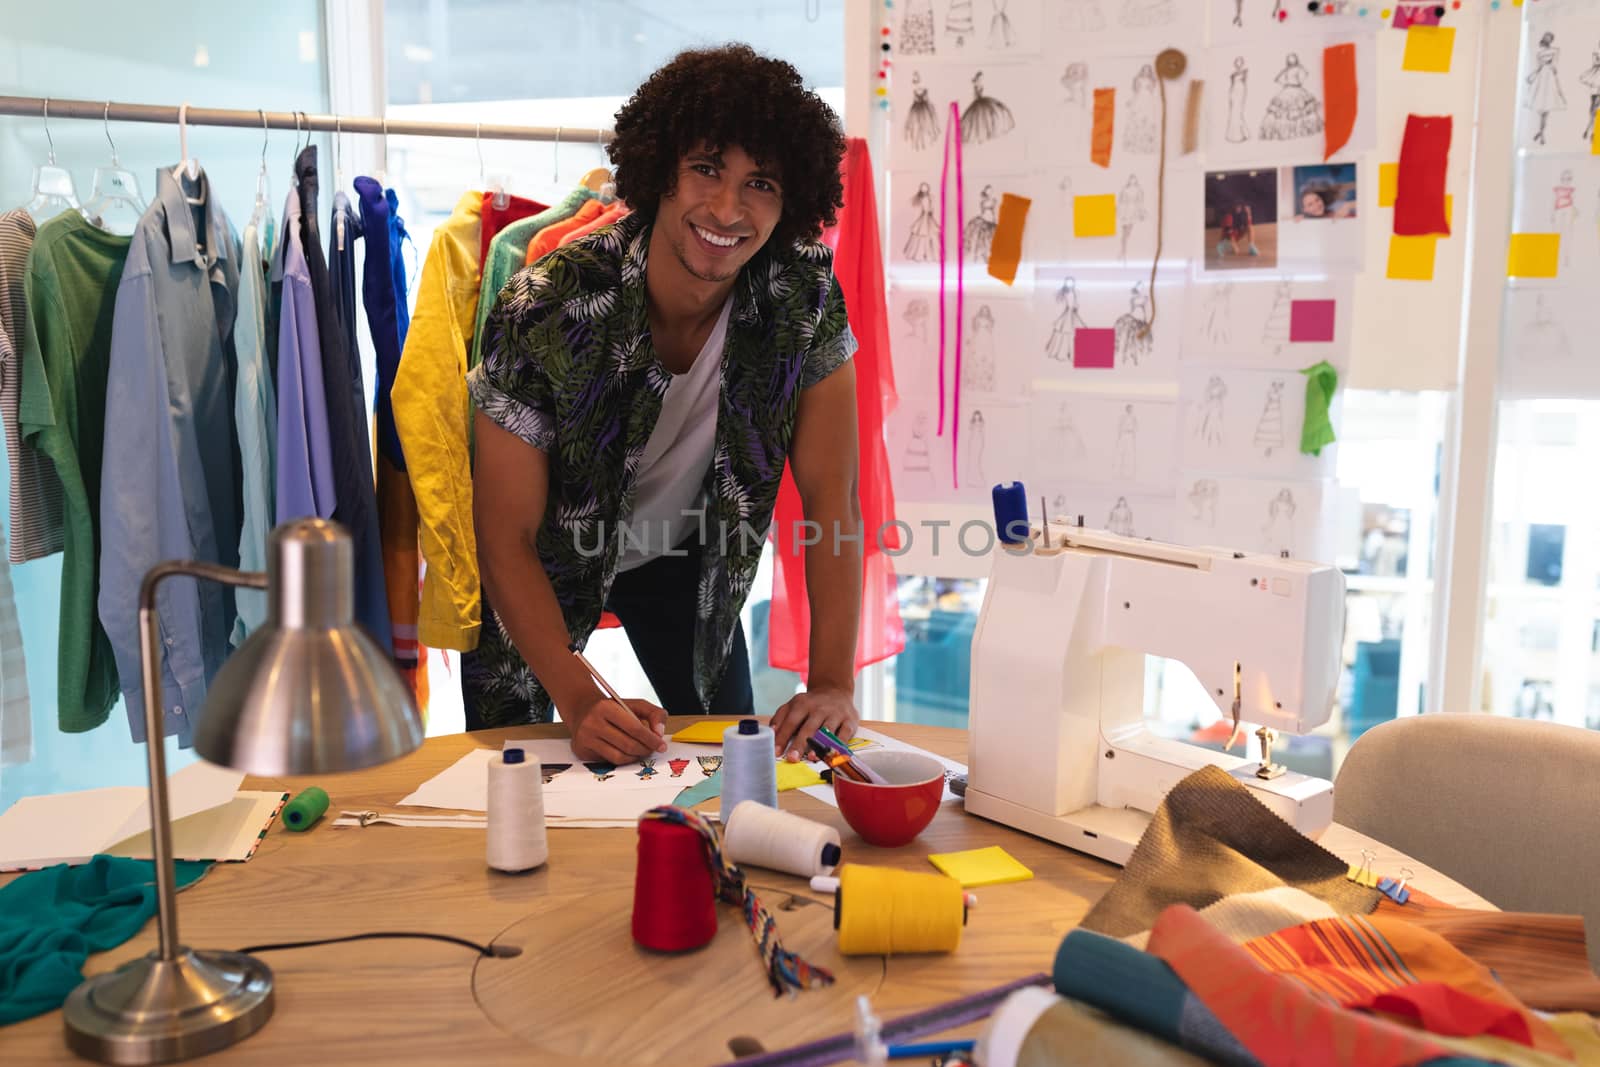 Front view of young handsome mixed race male fashion designer drawing a sketch at desk in design studio. This is a casual creative start-up business office for a diverse team